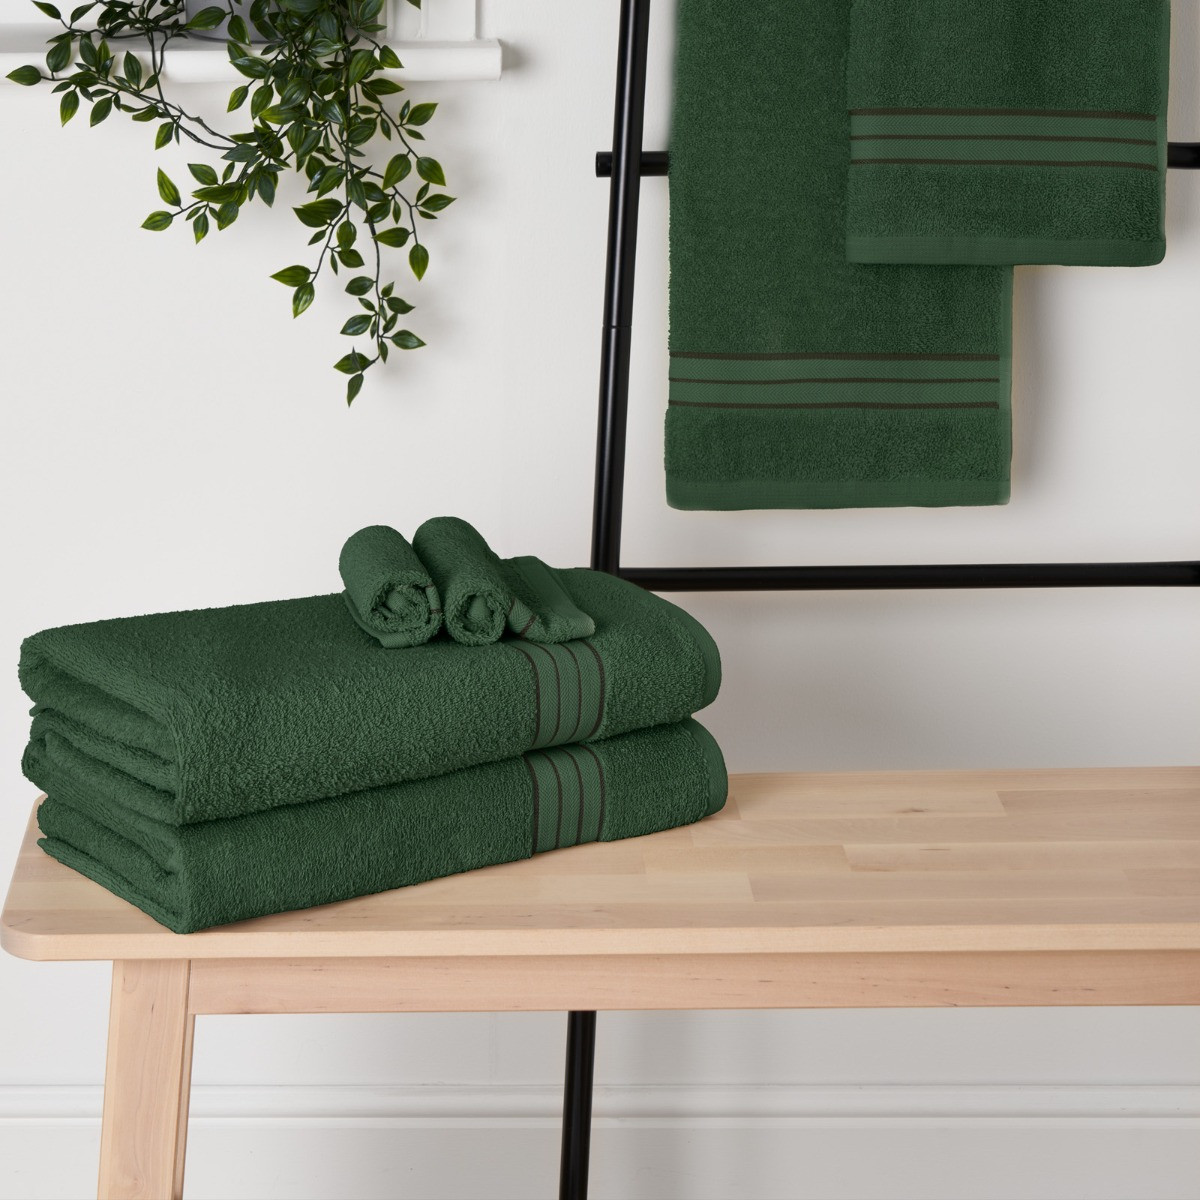 Brentfords 100% Cotton Hand Towel, Forest Green - 1PC>